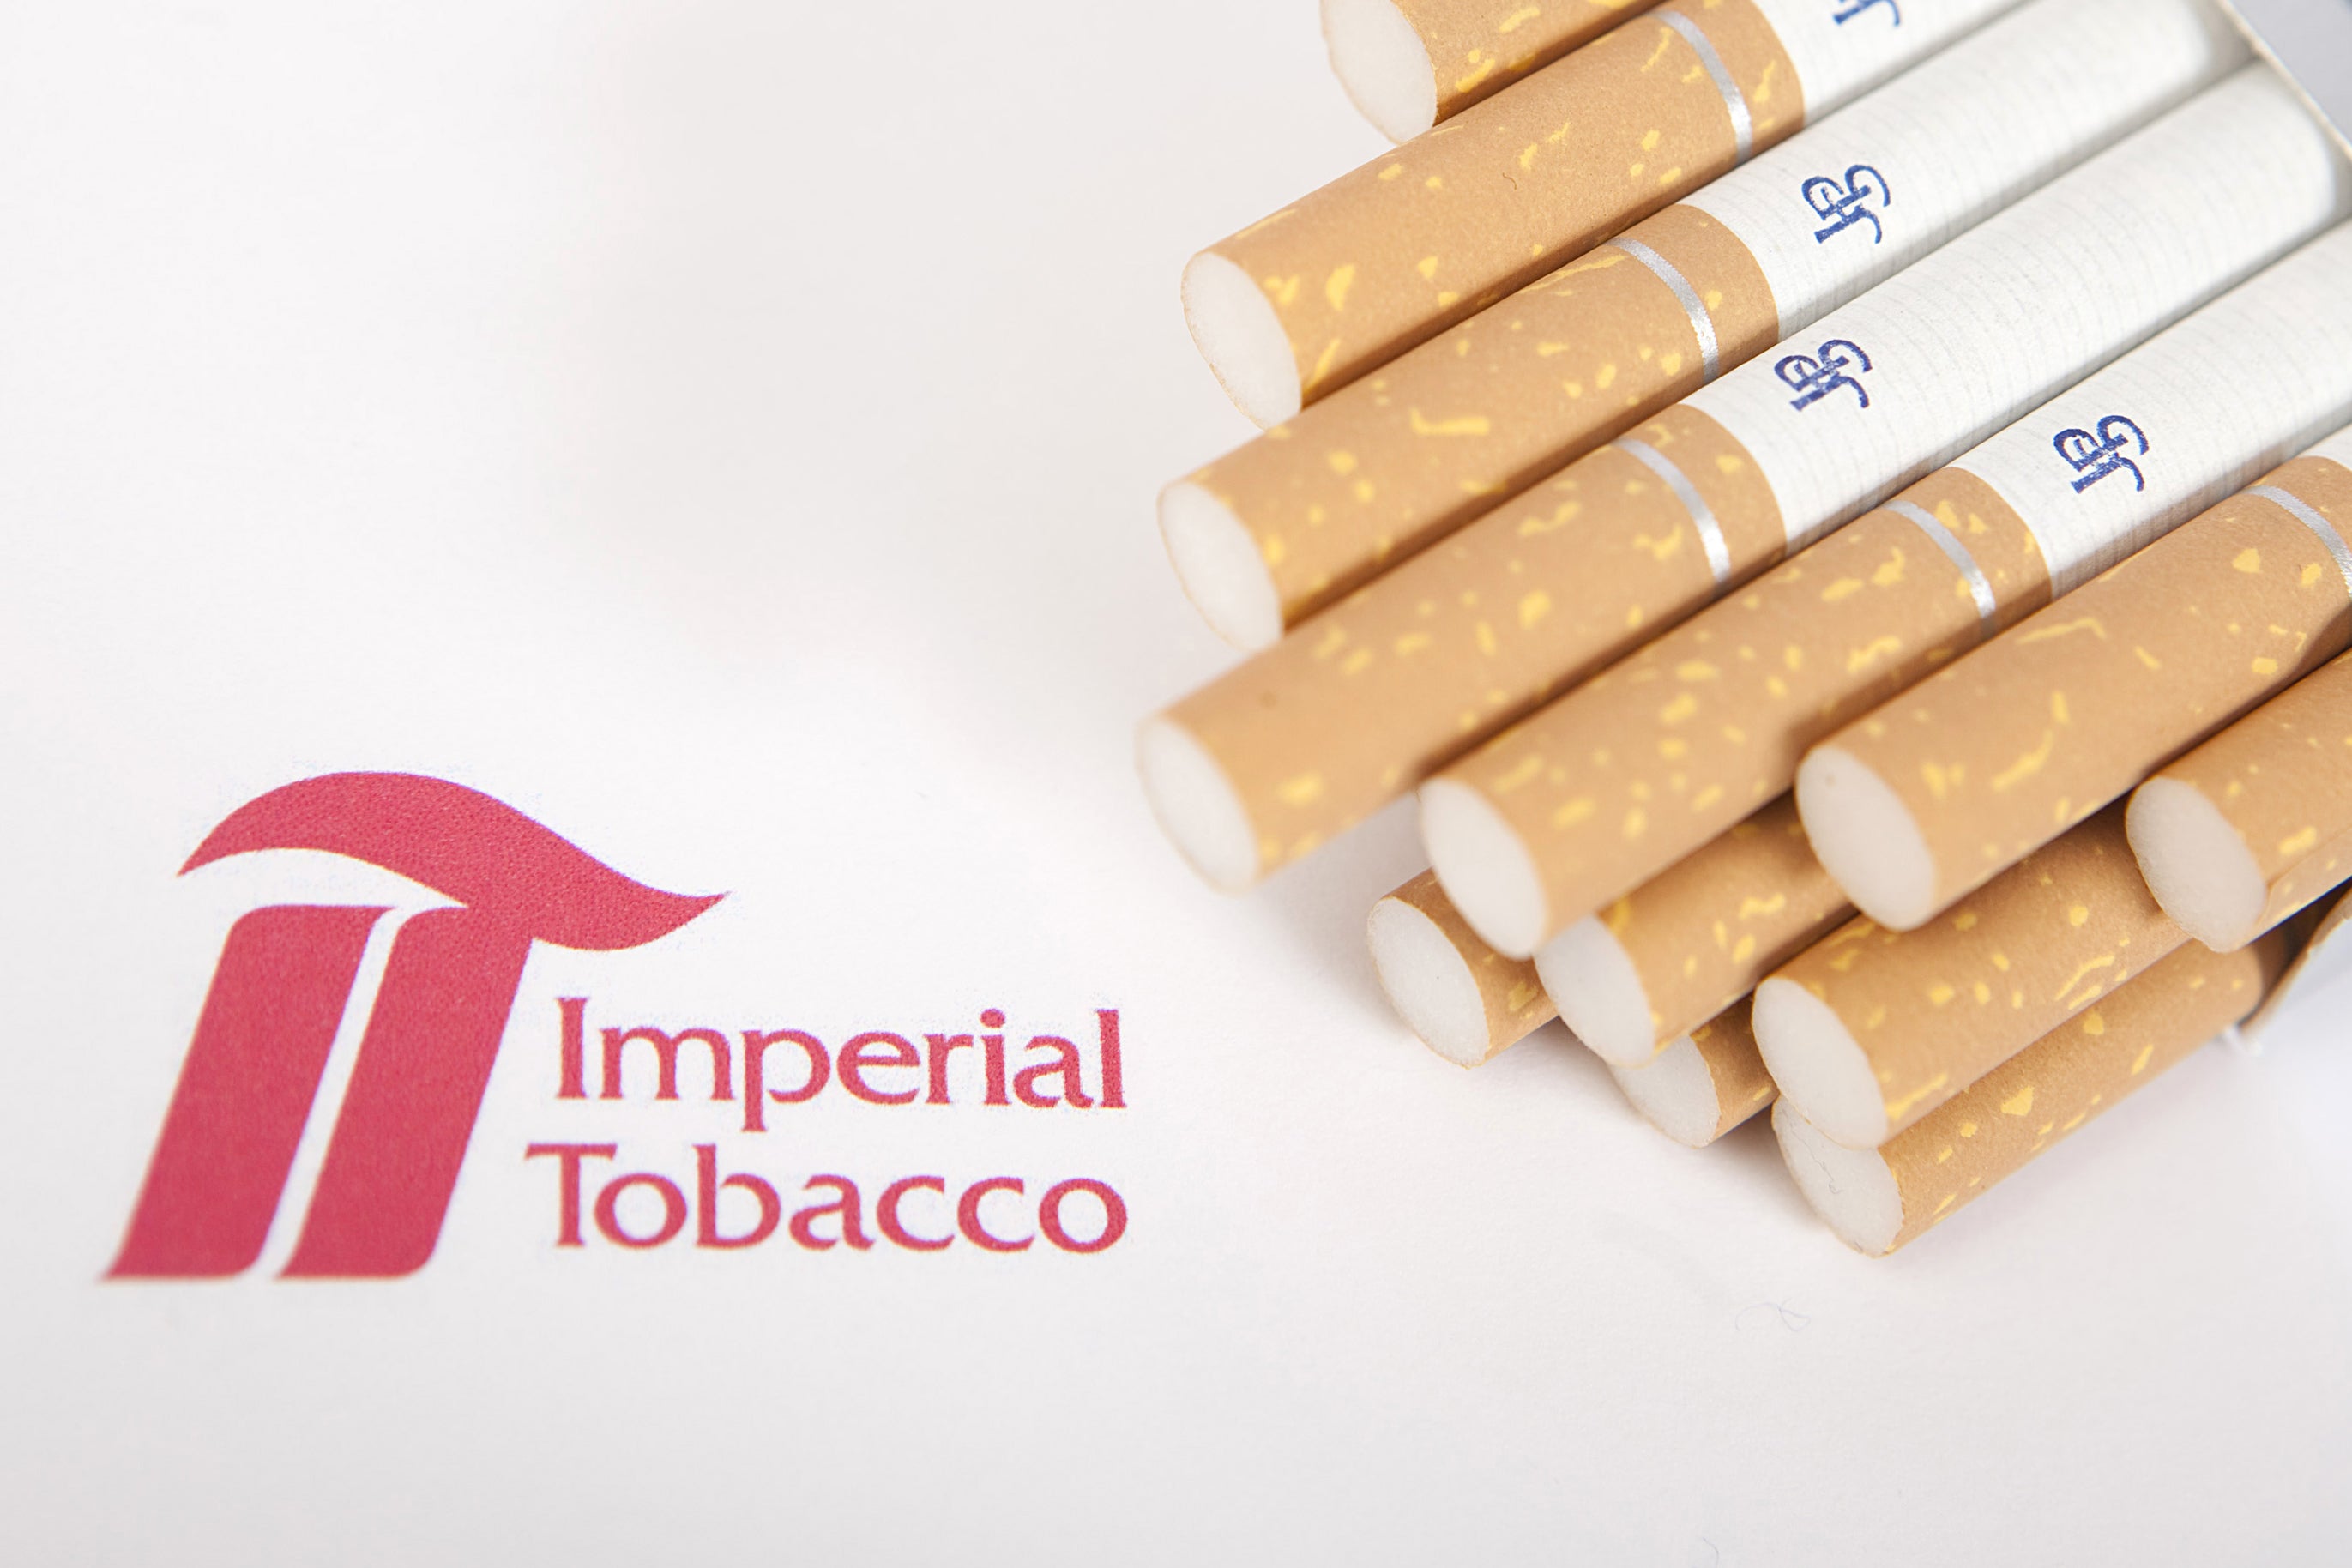 Tobacco giant Imperial Brands rethinks CEO's pay rise after revolt, Executive pay and bonuses